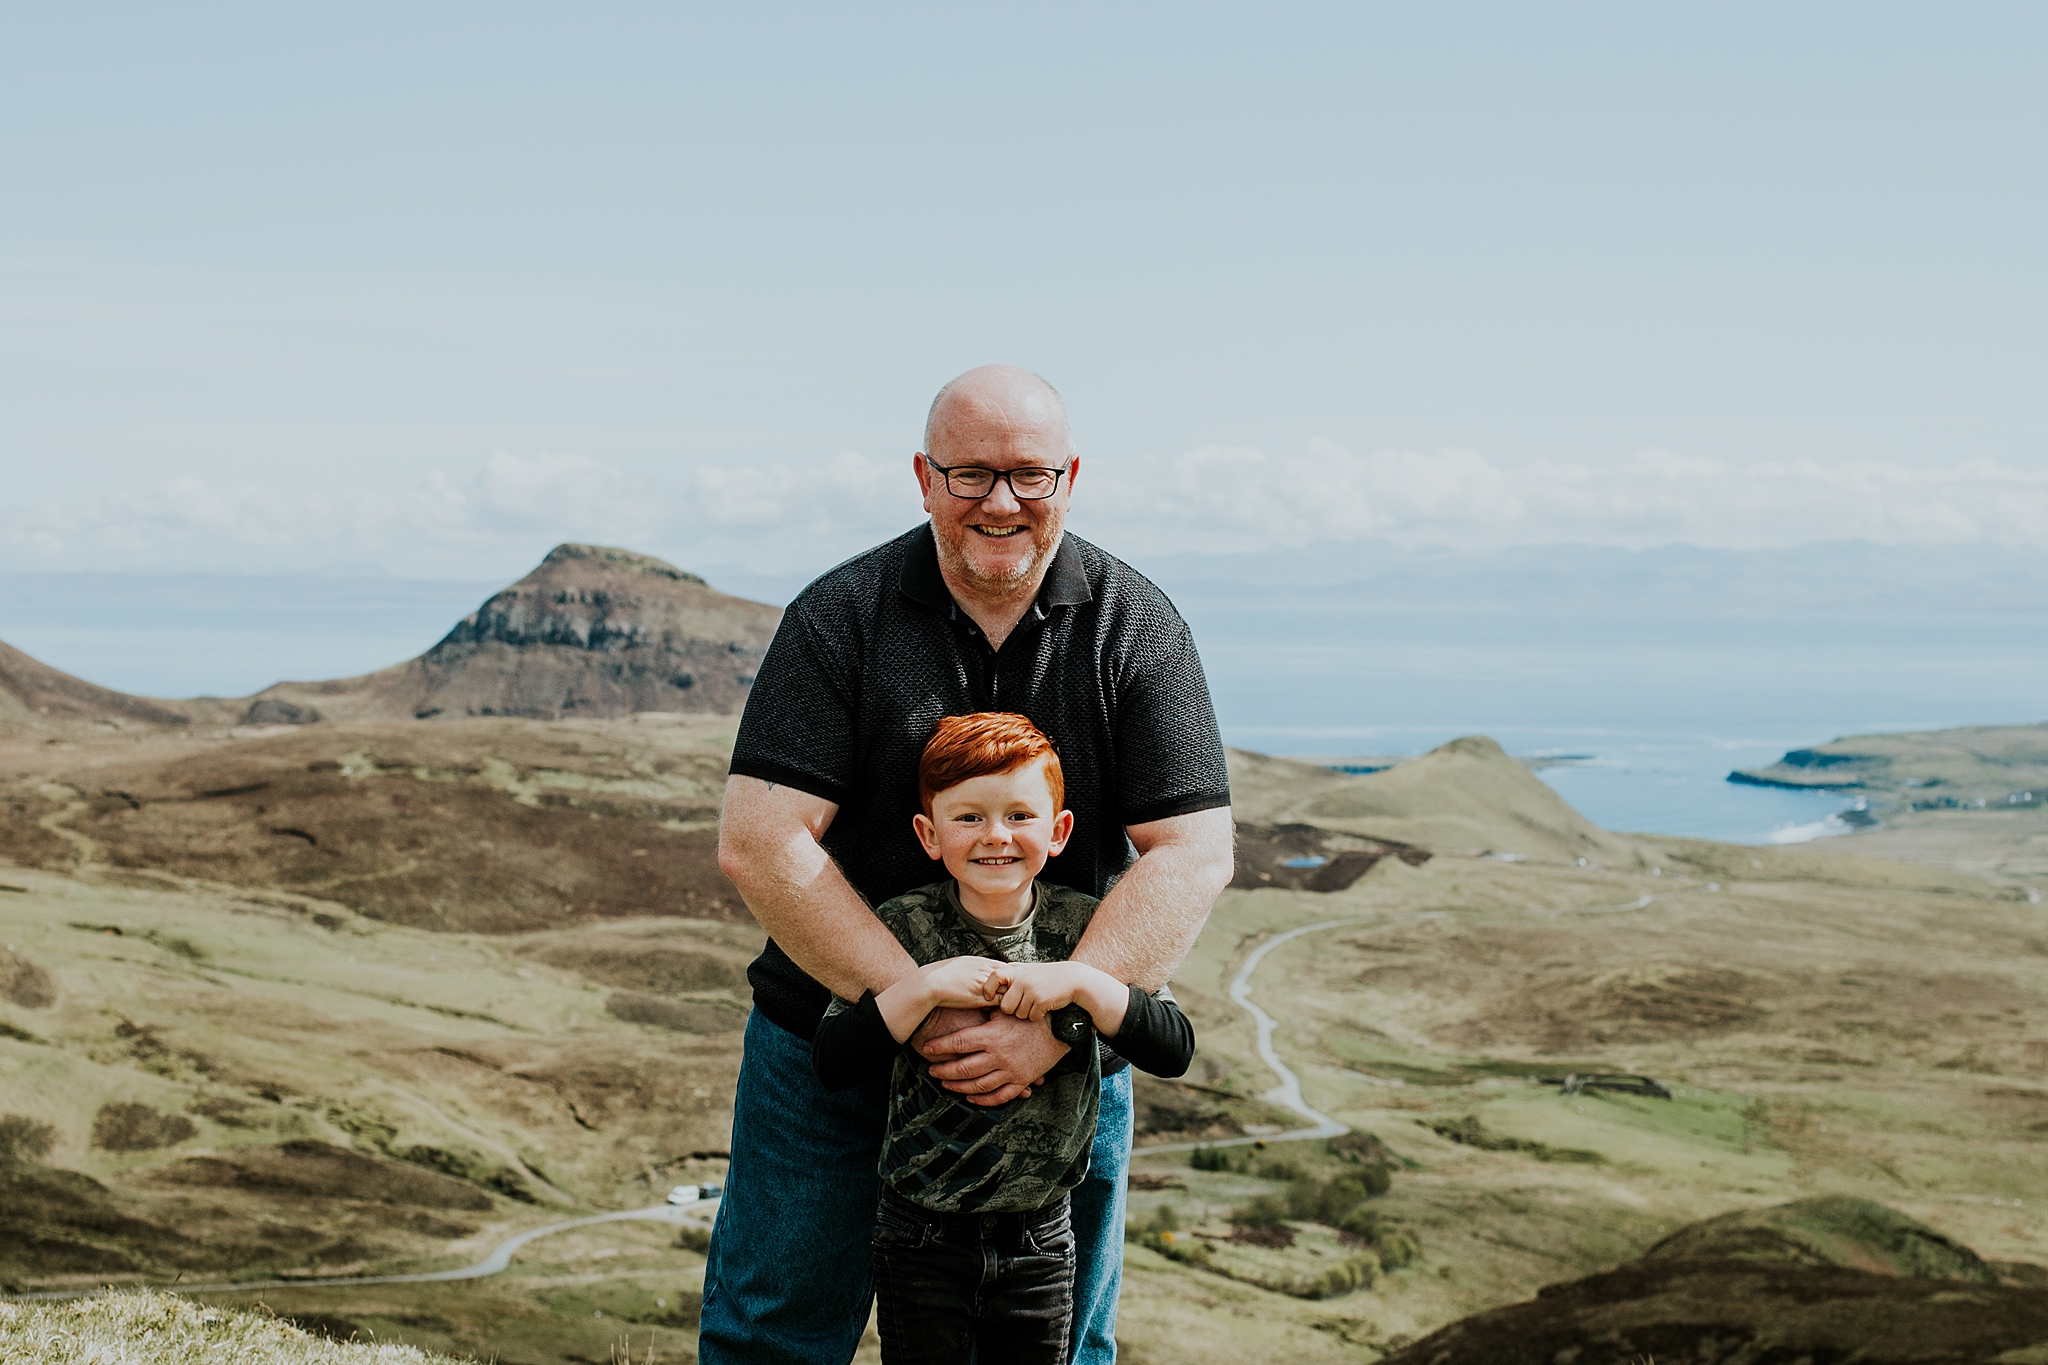 dad smiling with arms around his young red headed son also smiling in the sunshine at the quiraing on the isle of skye